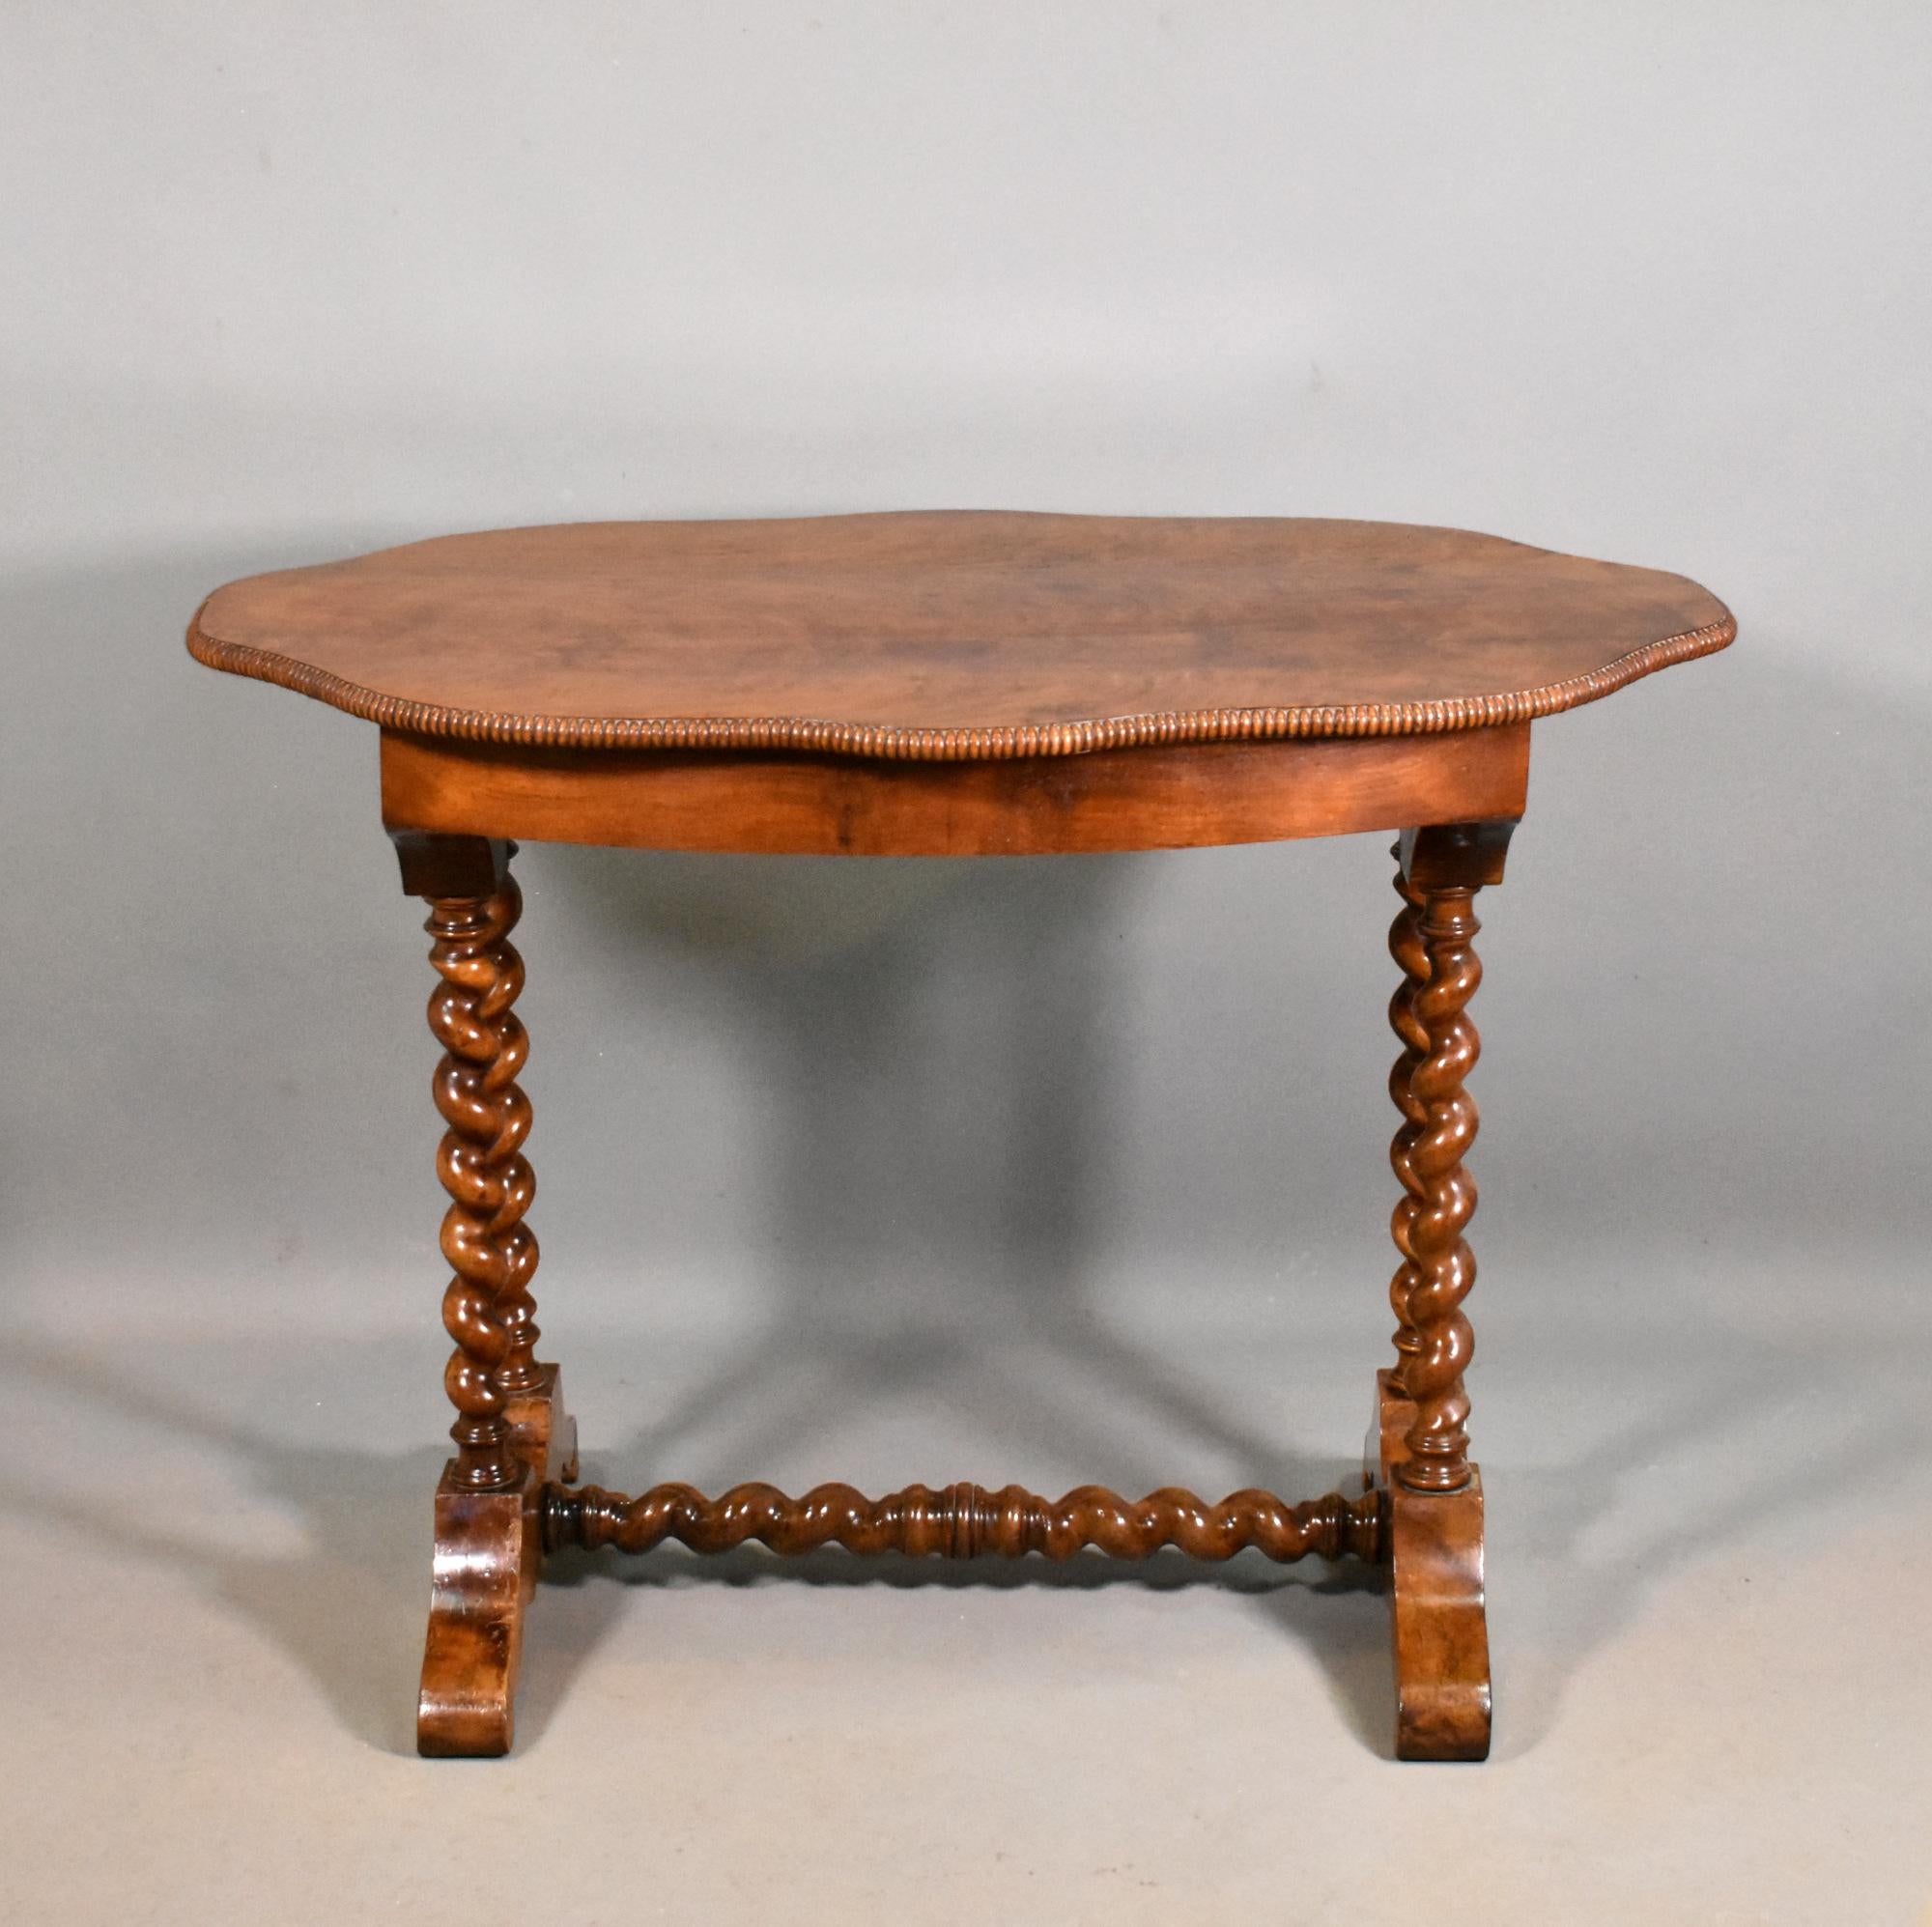 Antique French Gueridon Centre Table in Walnut 

This Antique French Walnut Gueridon Centre Table features a striking book-matched wild grain walnut top with a shaped and moulded outer edge. 

The table stands on beautifully turned barley twist legs